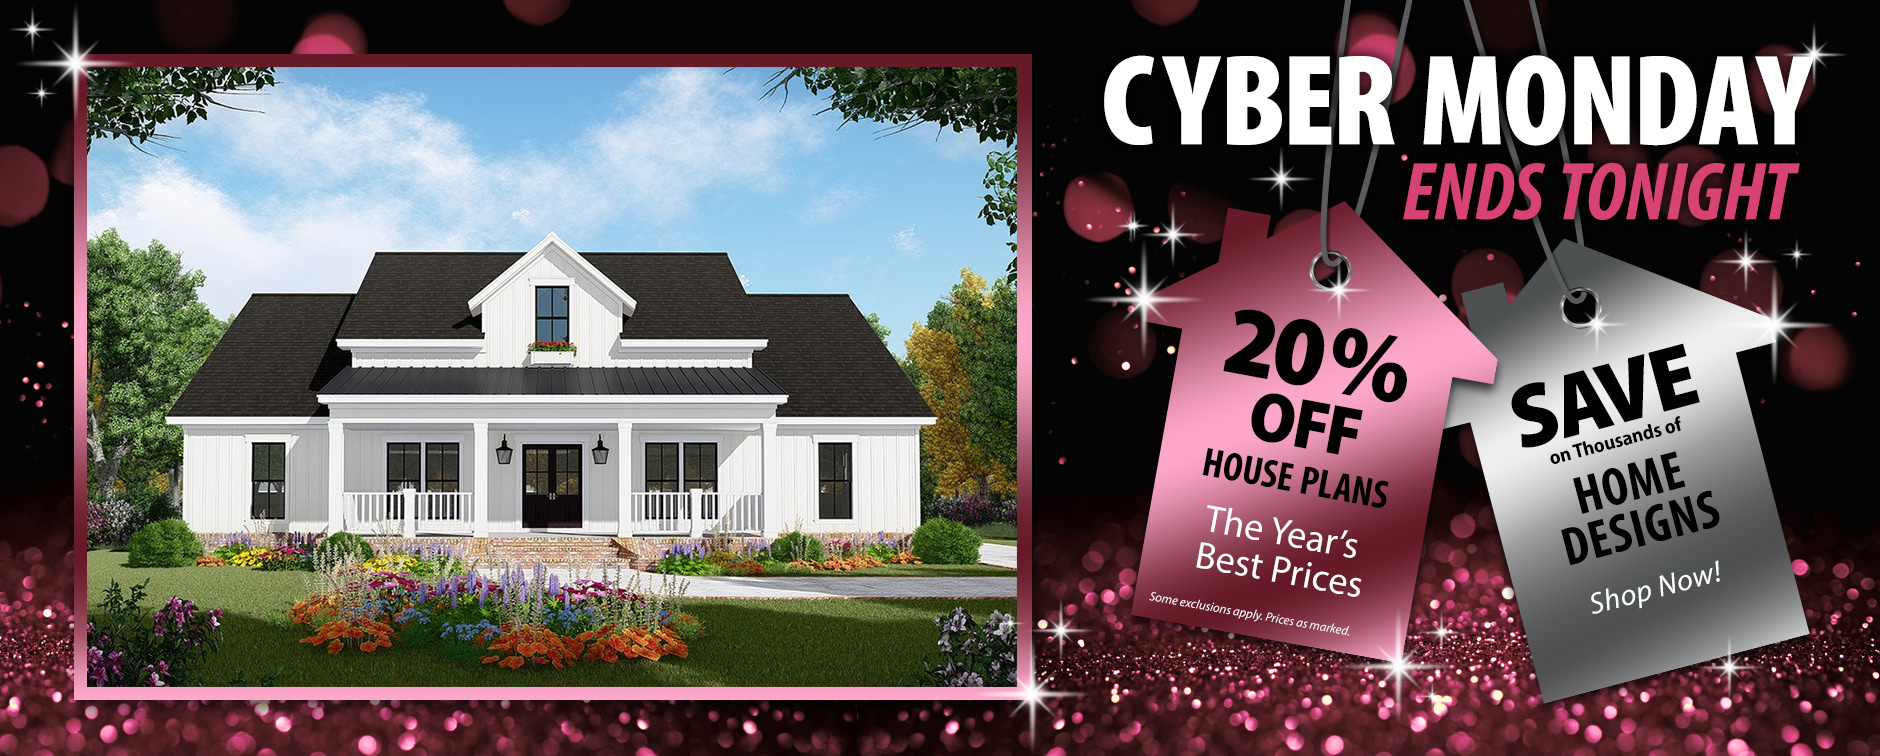 Save 20% on Thousands of Home Plans - Shop Now - Offer Ends Tonight